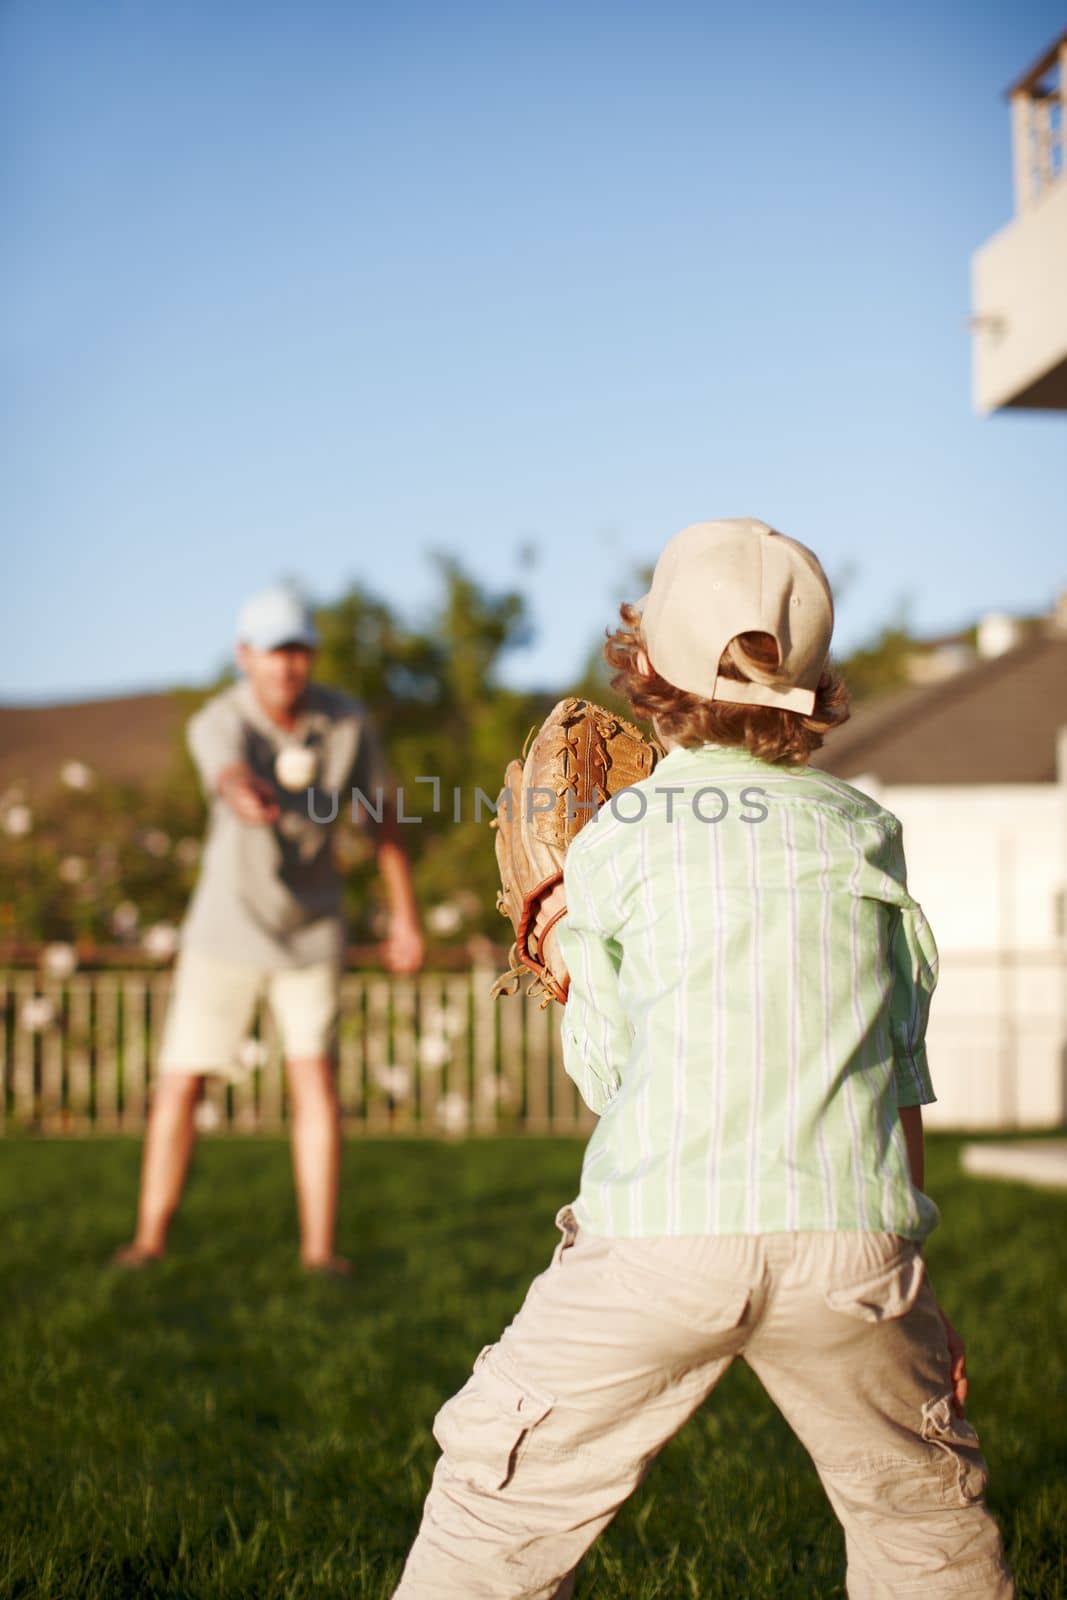 Playing catch. a father and son throwing the baseball outdoors in the yard